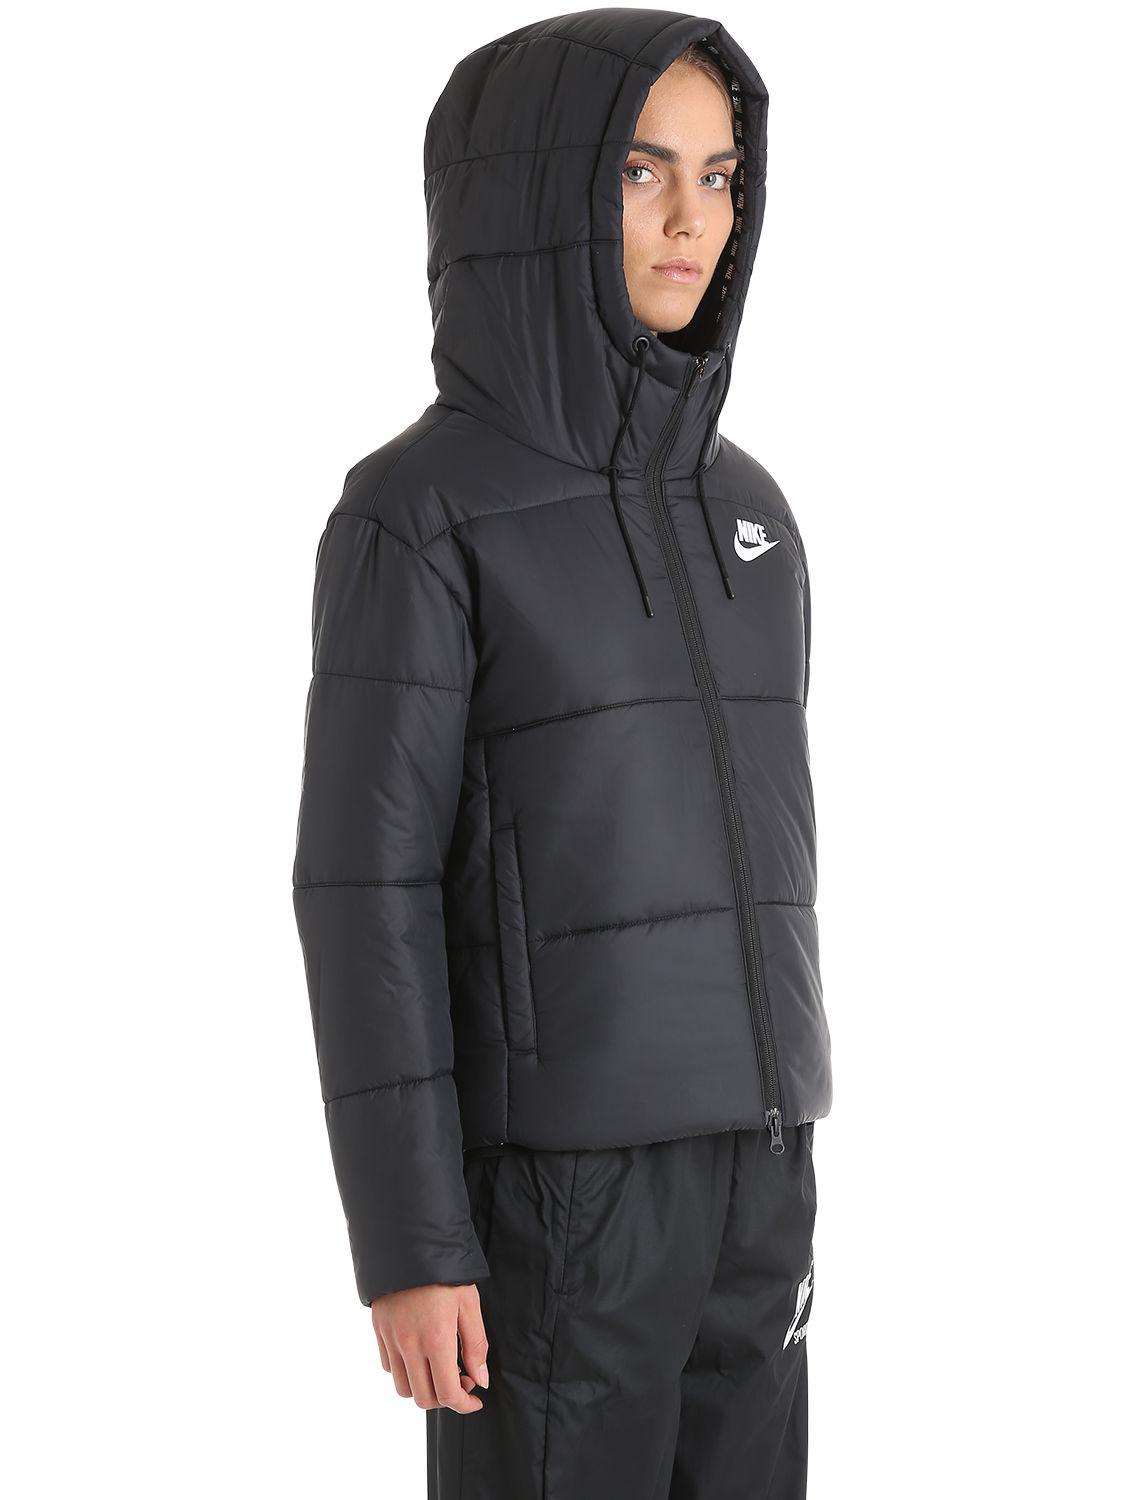 Nike Synthetic Advance 15 Puffer Jacket in Black - Lyst